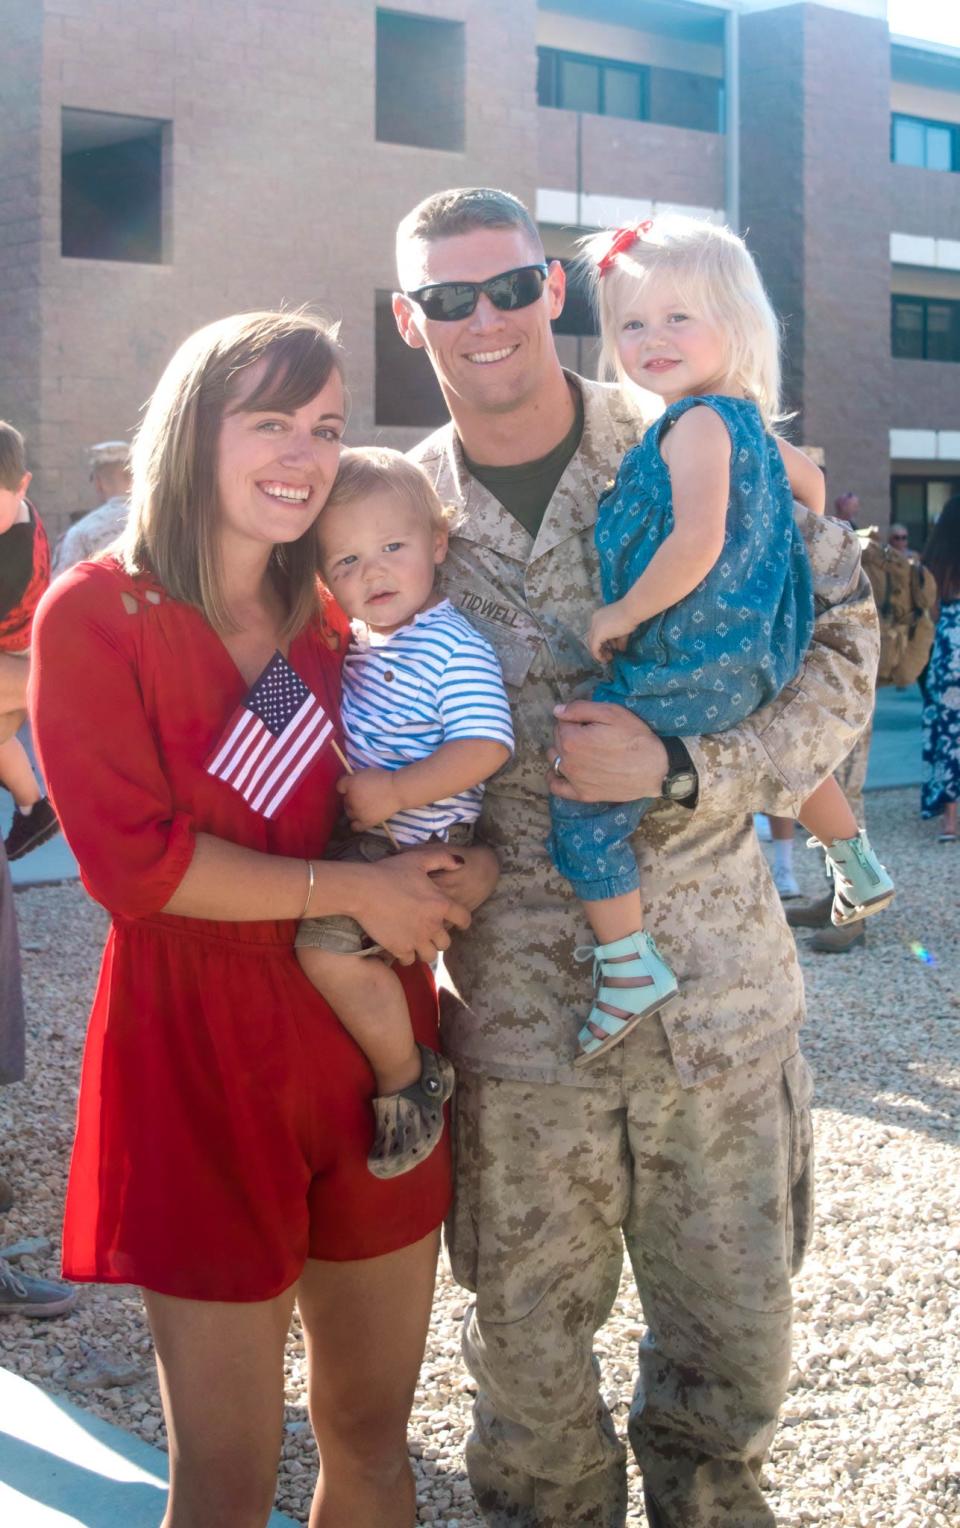 Tyler Tidwell, seen with wife, Cassi, son Bobby and daughter, Alex, deployed overseas several times with the Marines. He rose to the rank of major.